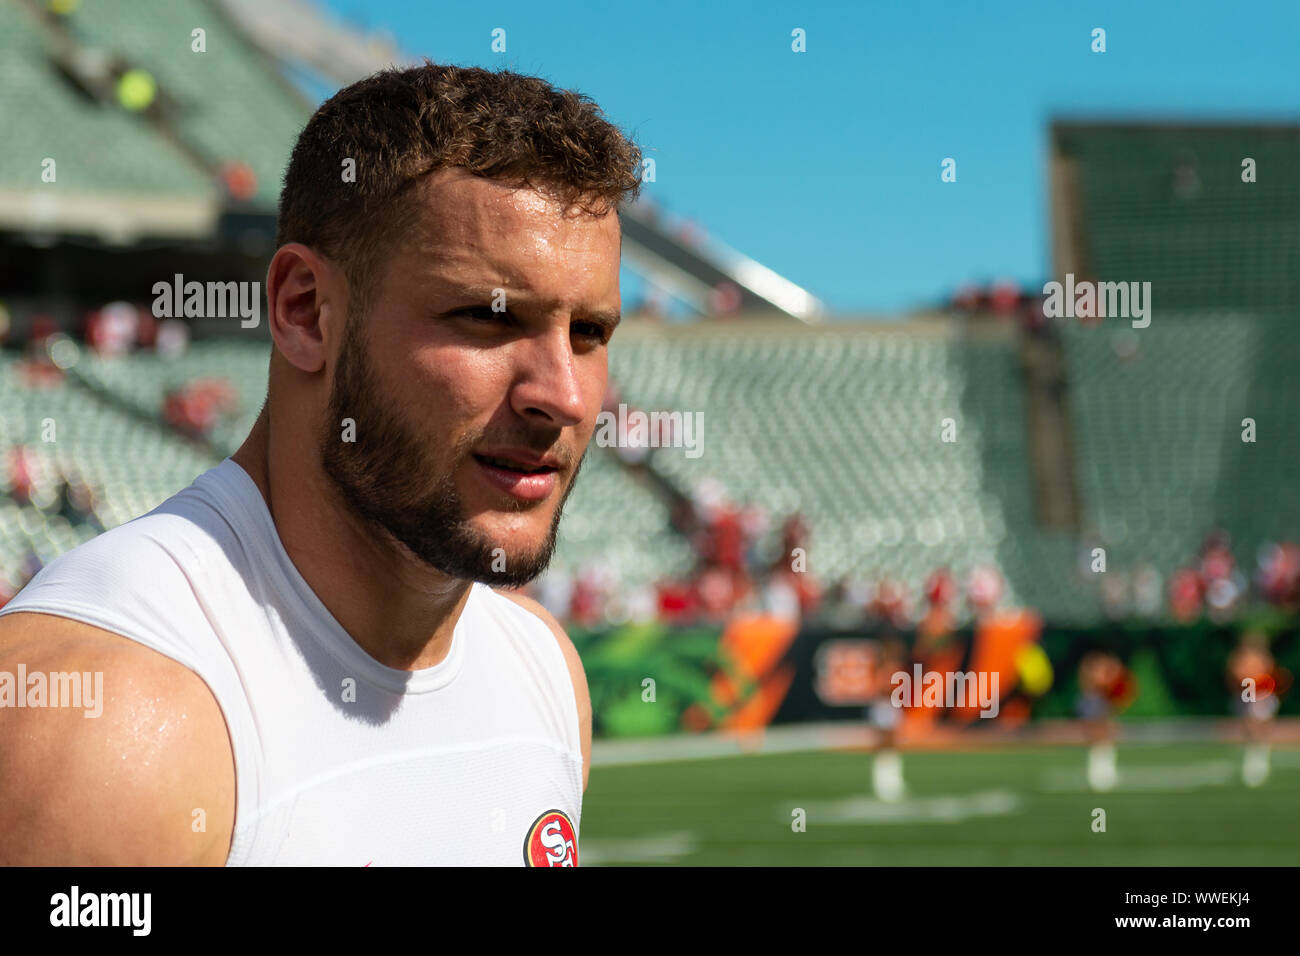 Cincinnati, OH, USA. 15th Sep, 2019. San Francisco 49ers defensive end Nick Bosa (97) jogs back to the locker room after an NFL football game between the San Francisco 49ers and the Cincinnati Bengals at Paul Brown Stadium on September 15, 2019 in Cincinnati, OH. Adam Lacy/CSM/Alamy Live News Stock Photo